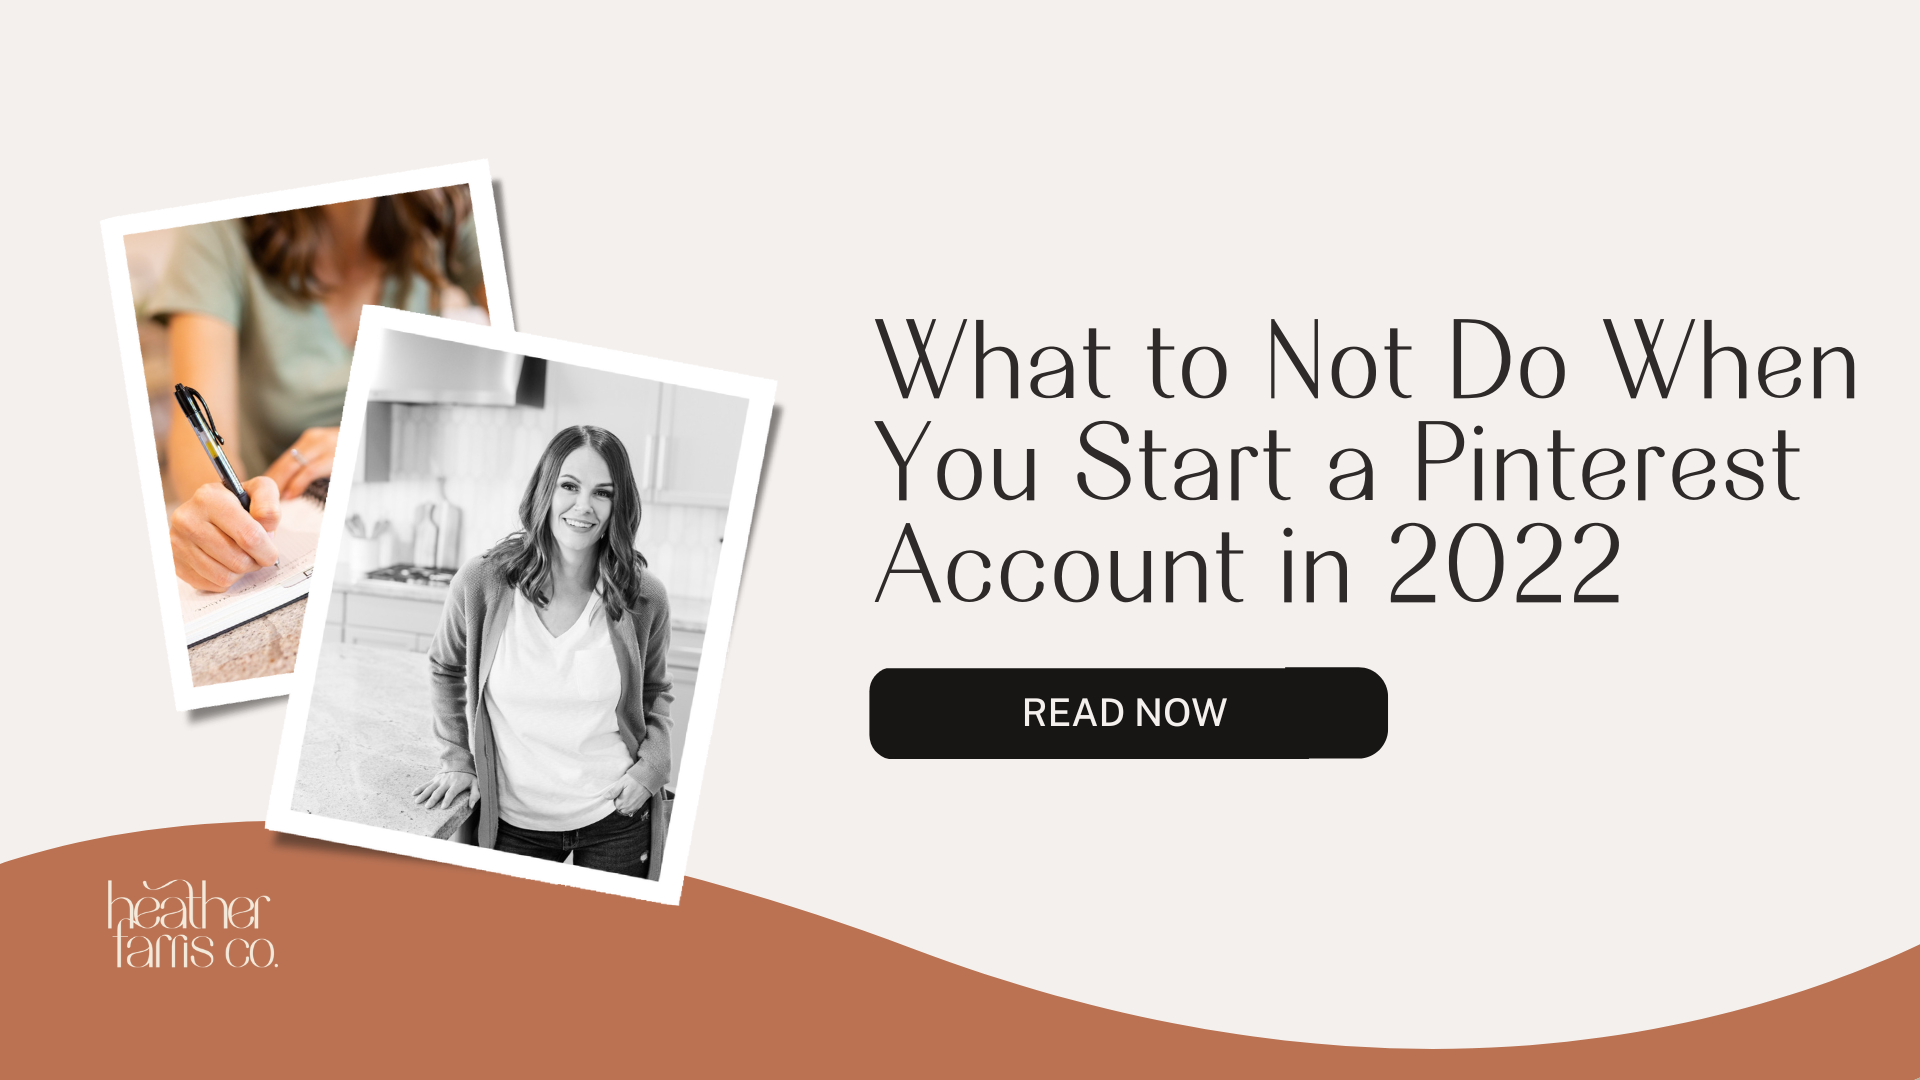 What to Not Do When You Start a Pinterest Account in 2022